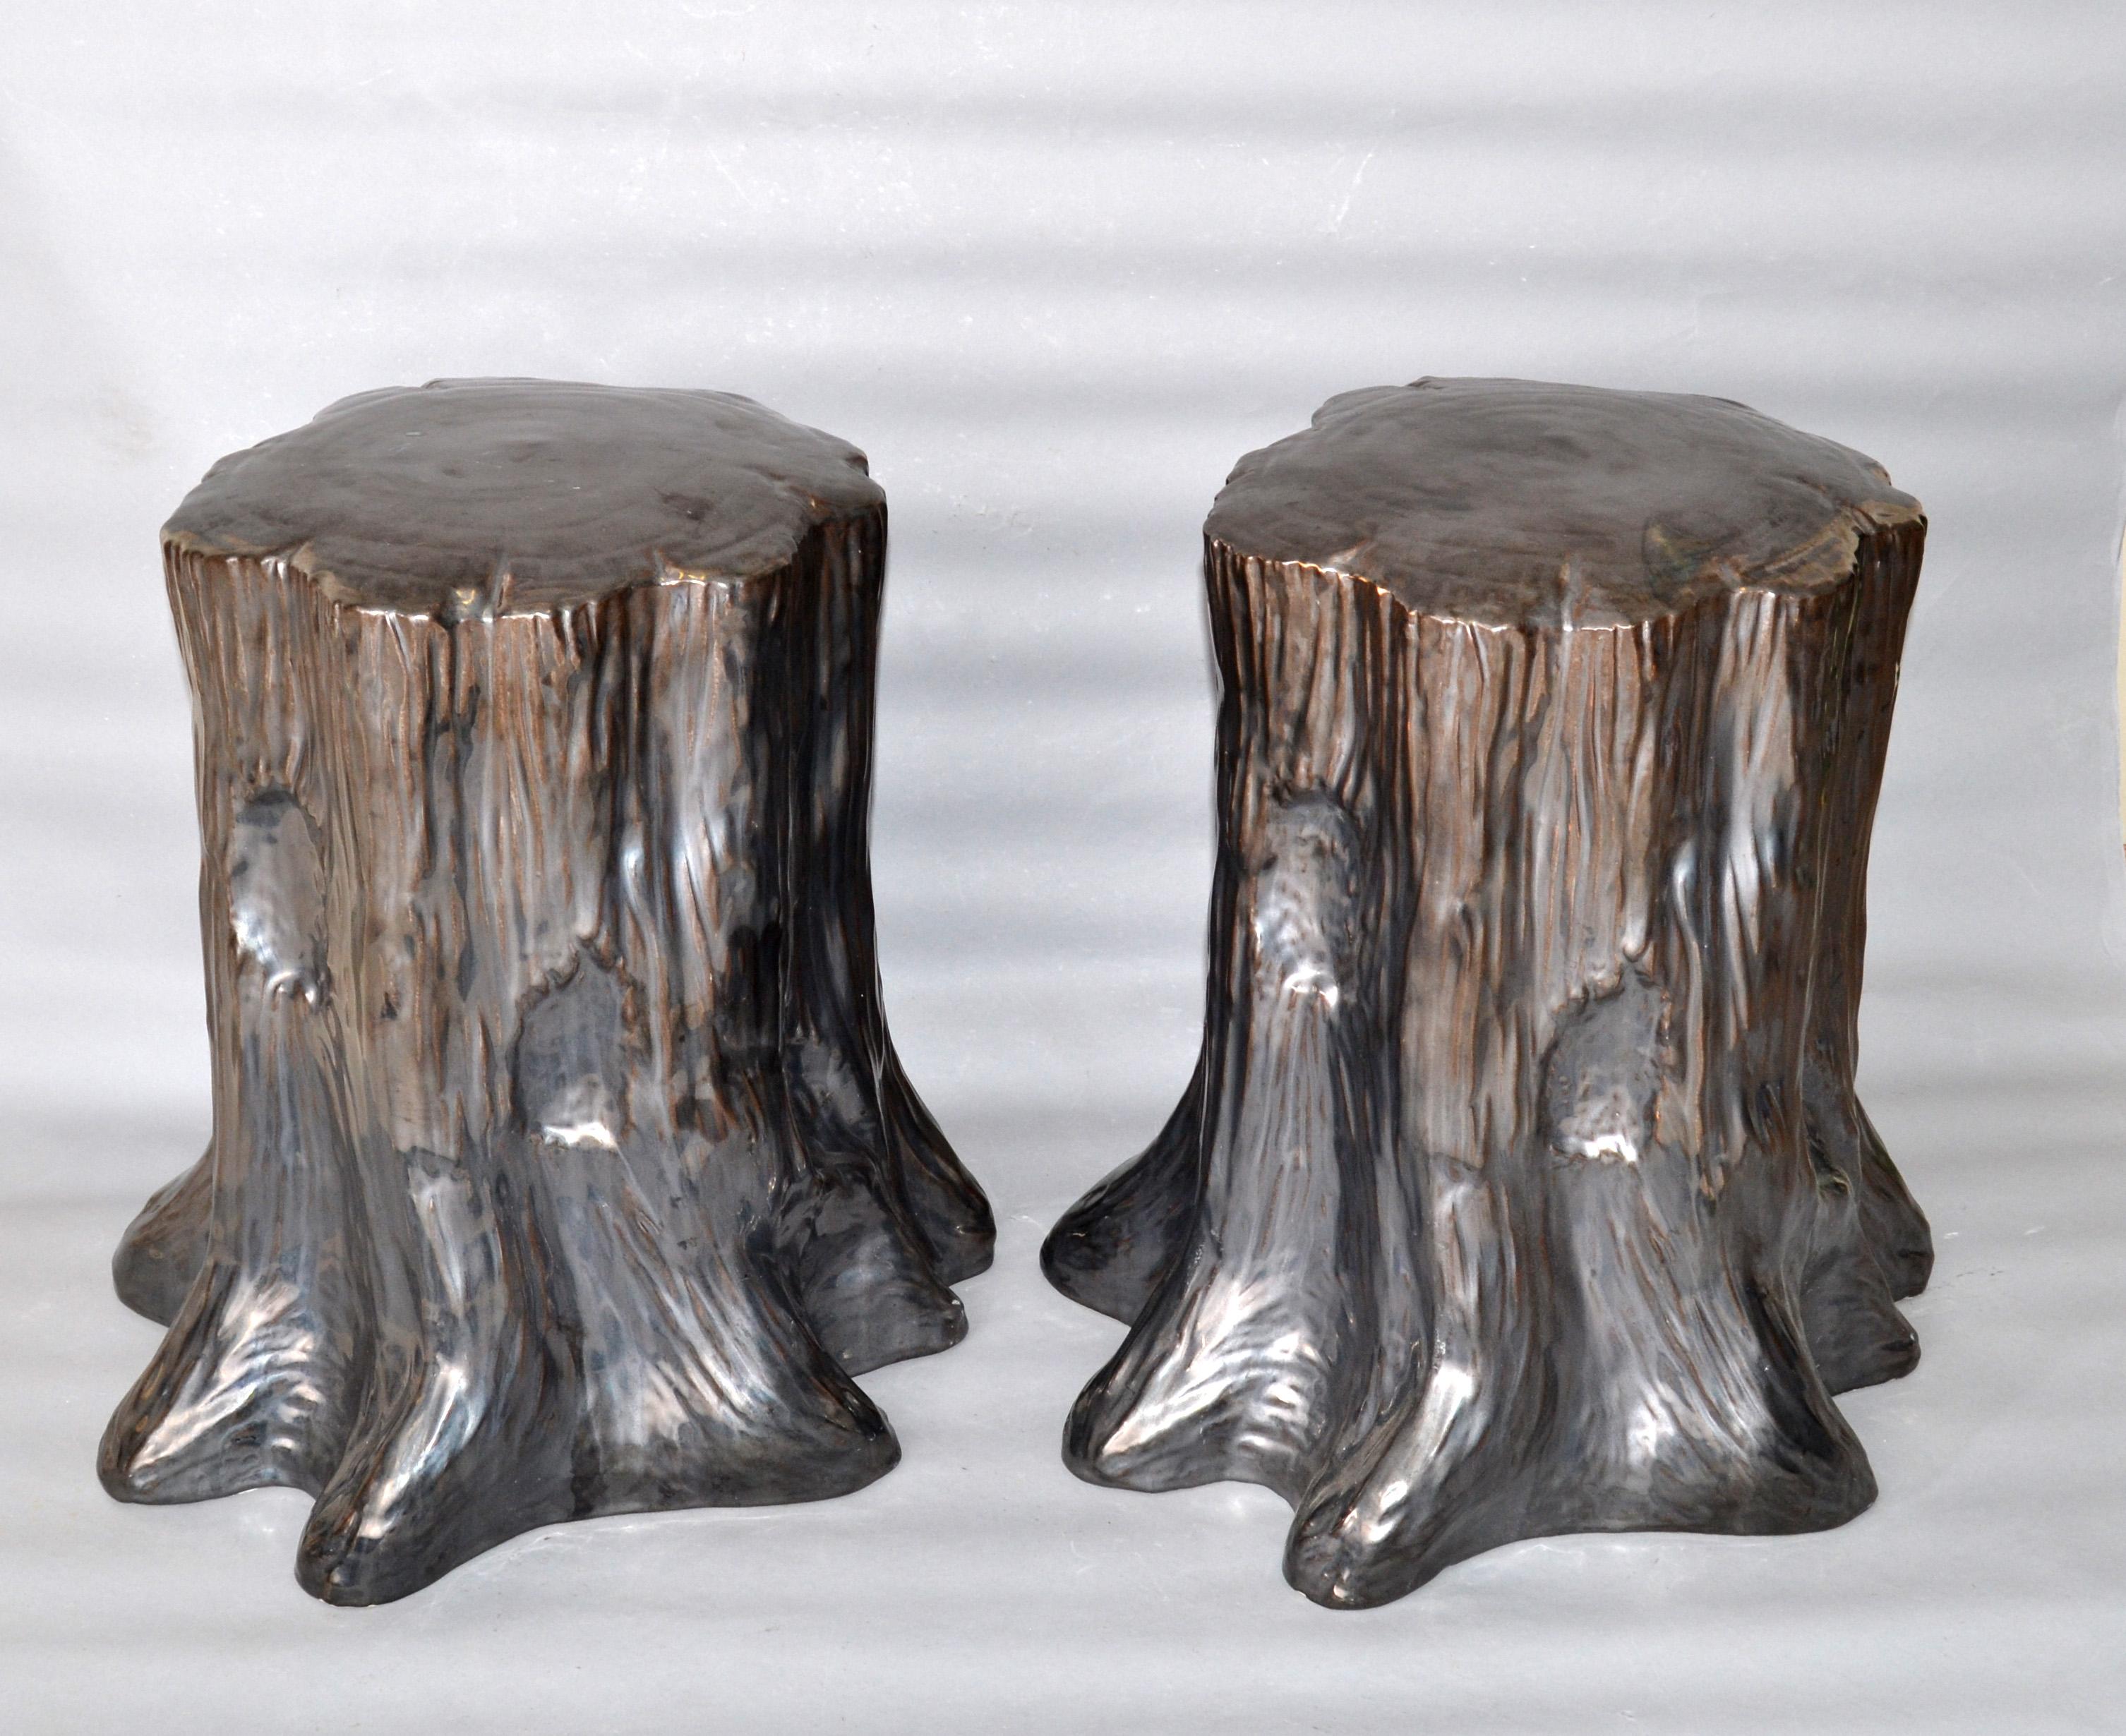 Glazed Hollywood Regency Style Outdoor Silver Ceramic Side Table Tree Stump Look, Pair